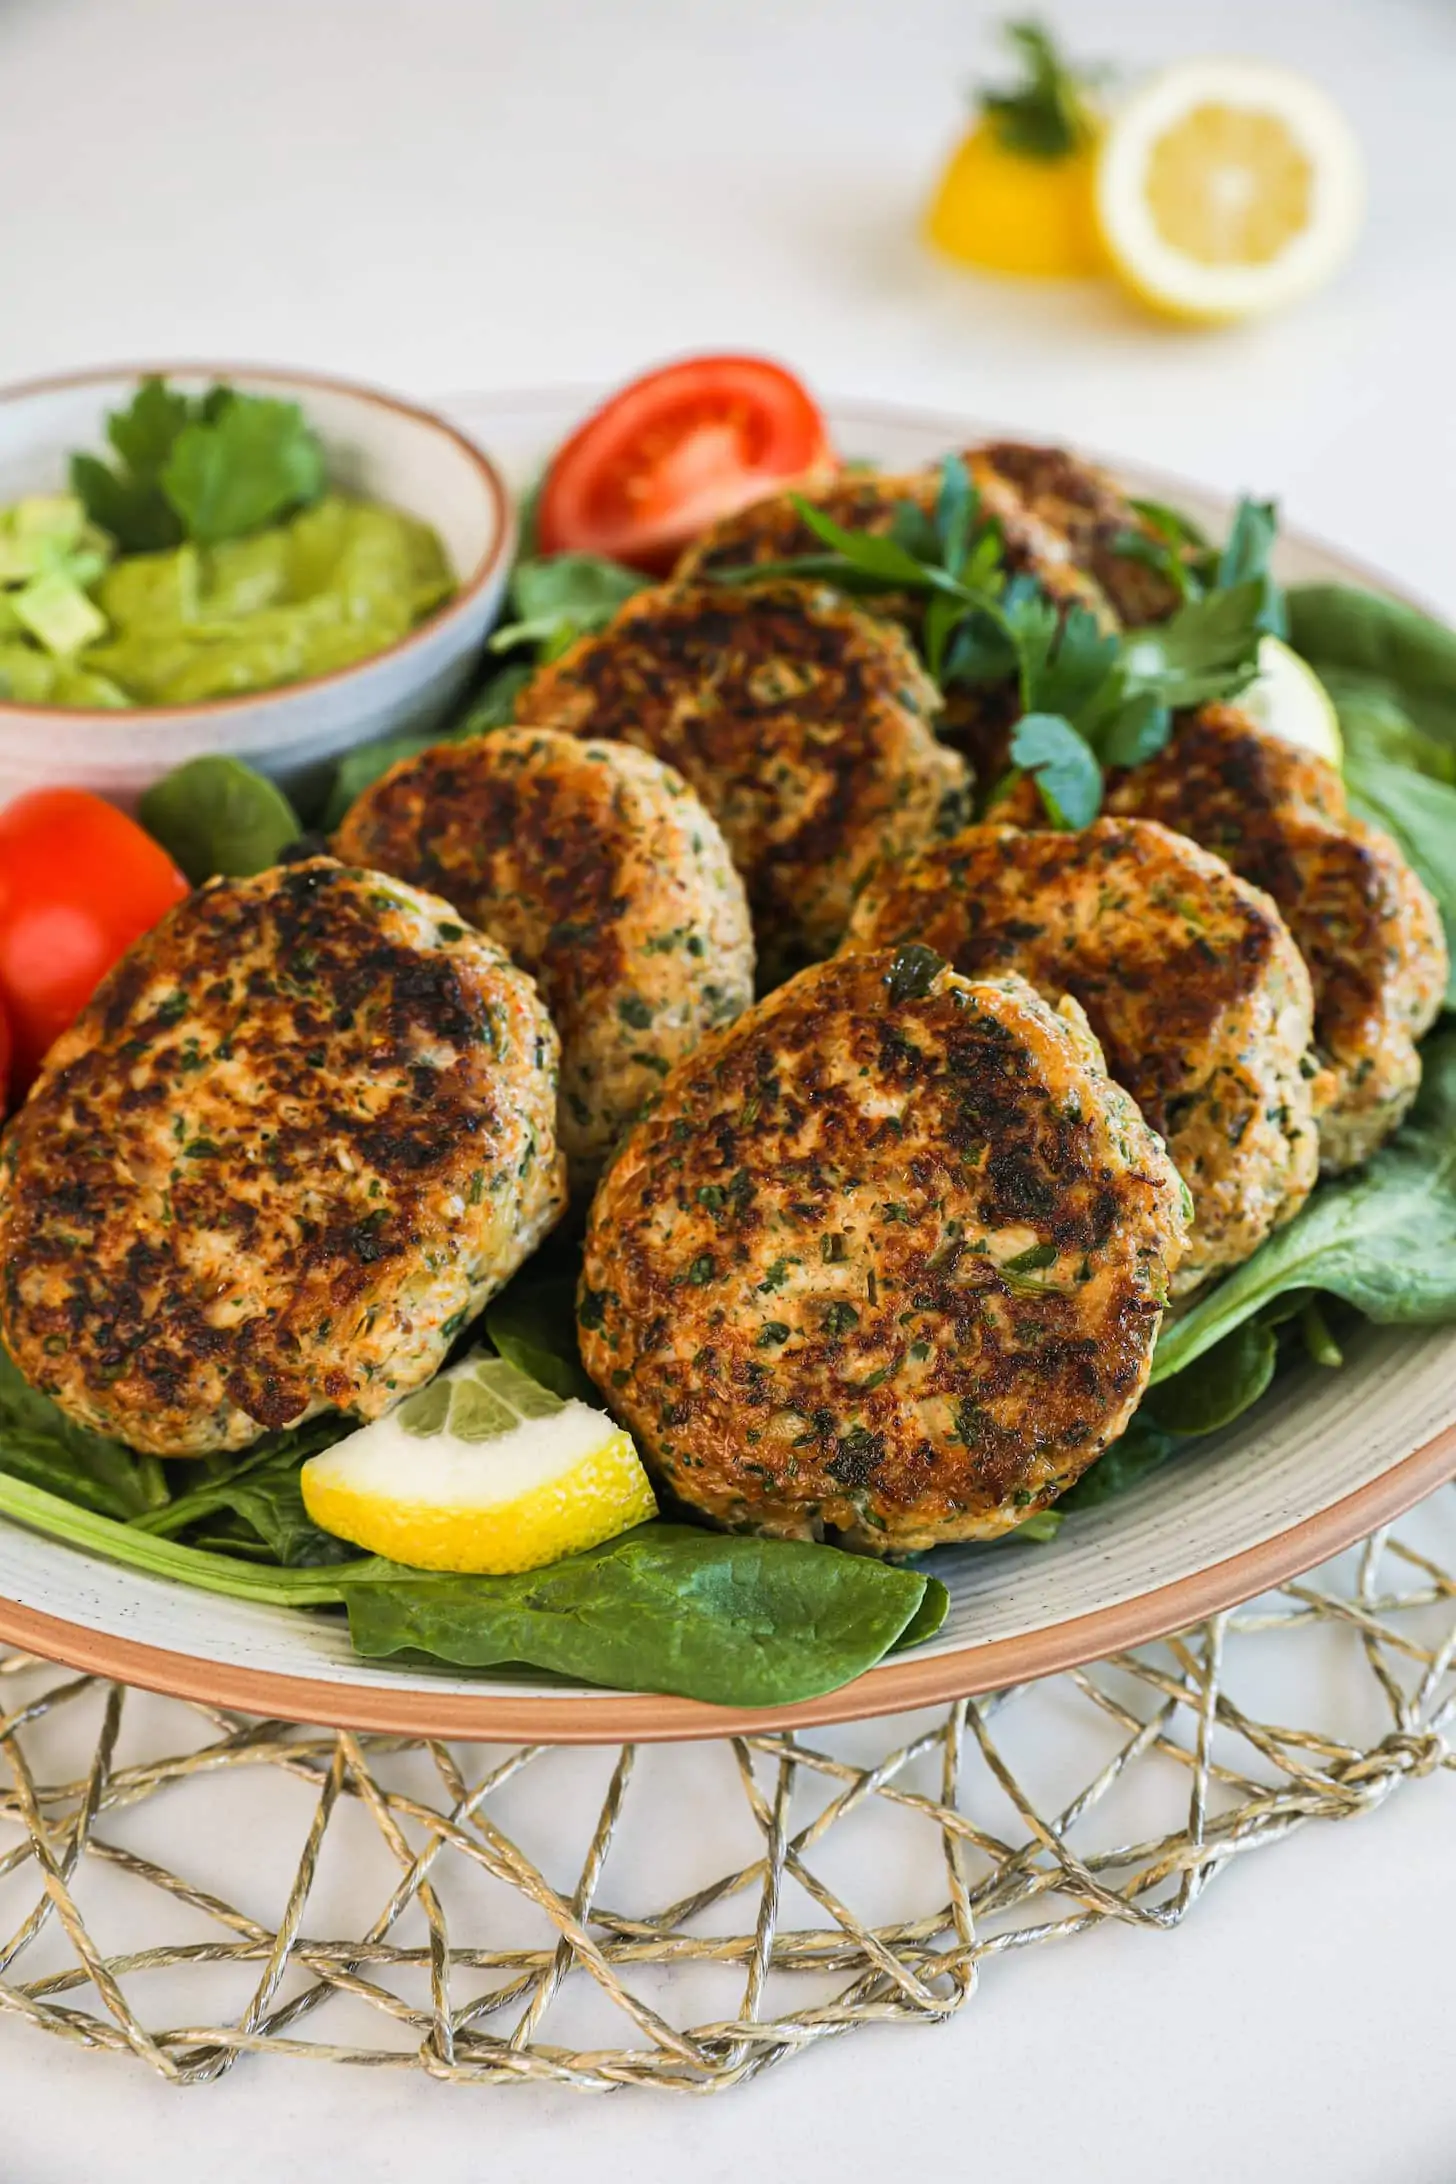 cooked patties overlaid on one another on a bed of greens with a bowl of dip on the side.